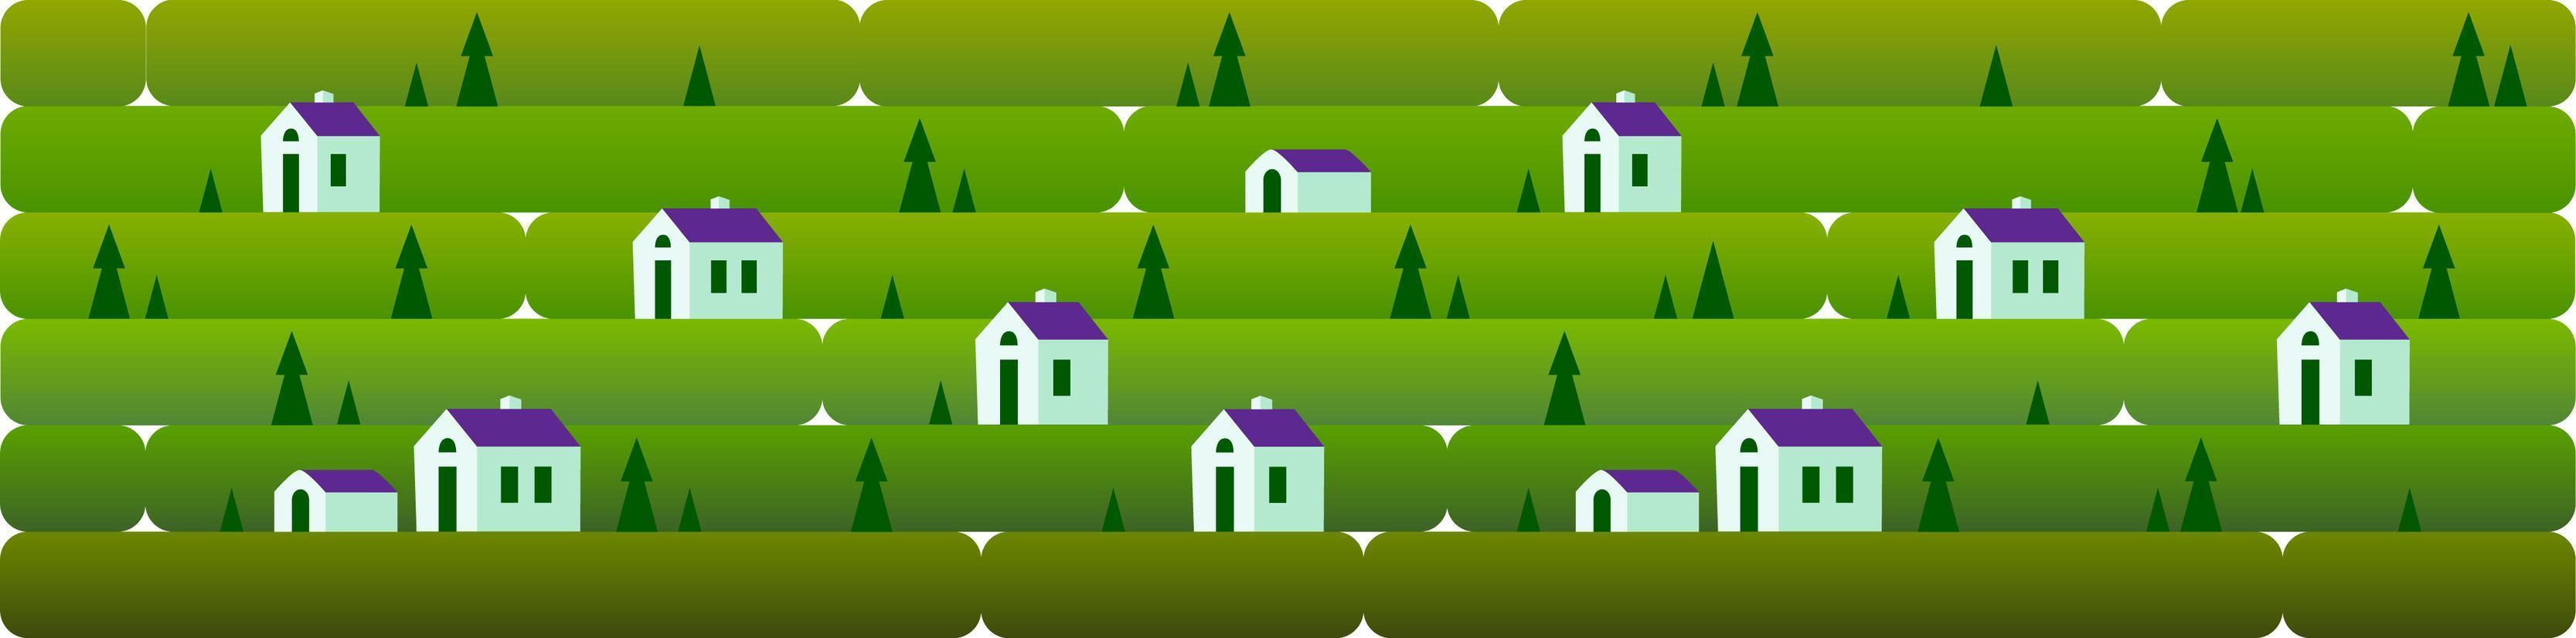 Banner a evening landscape with small houses, against a background of grass, nature, hills. Vector illustration in flat style for design, games or web sites